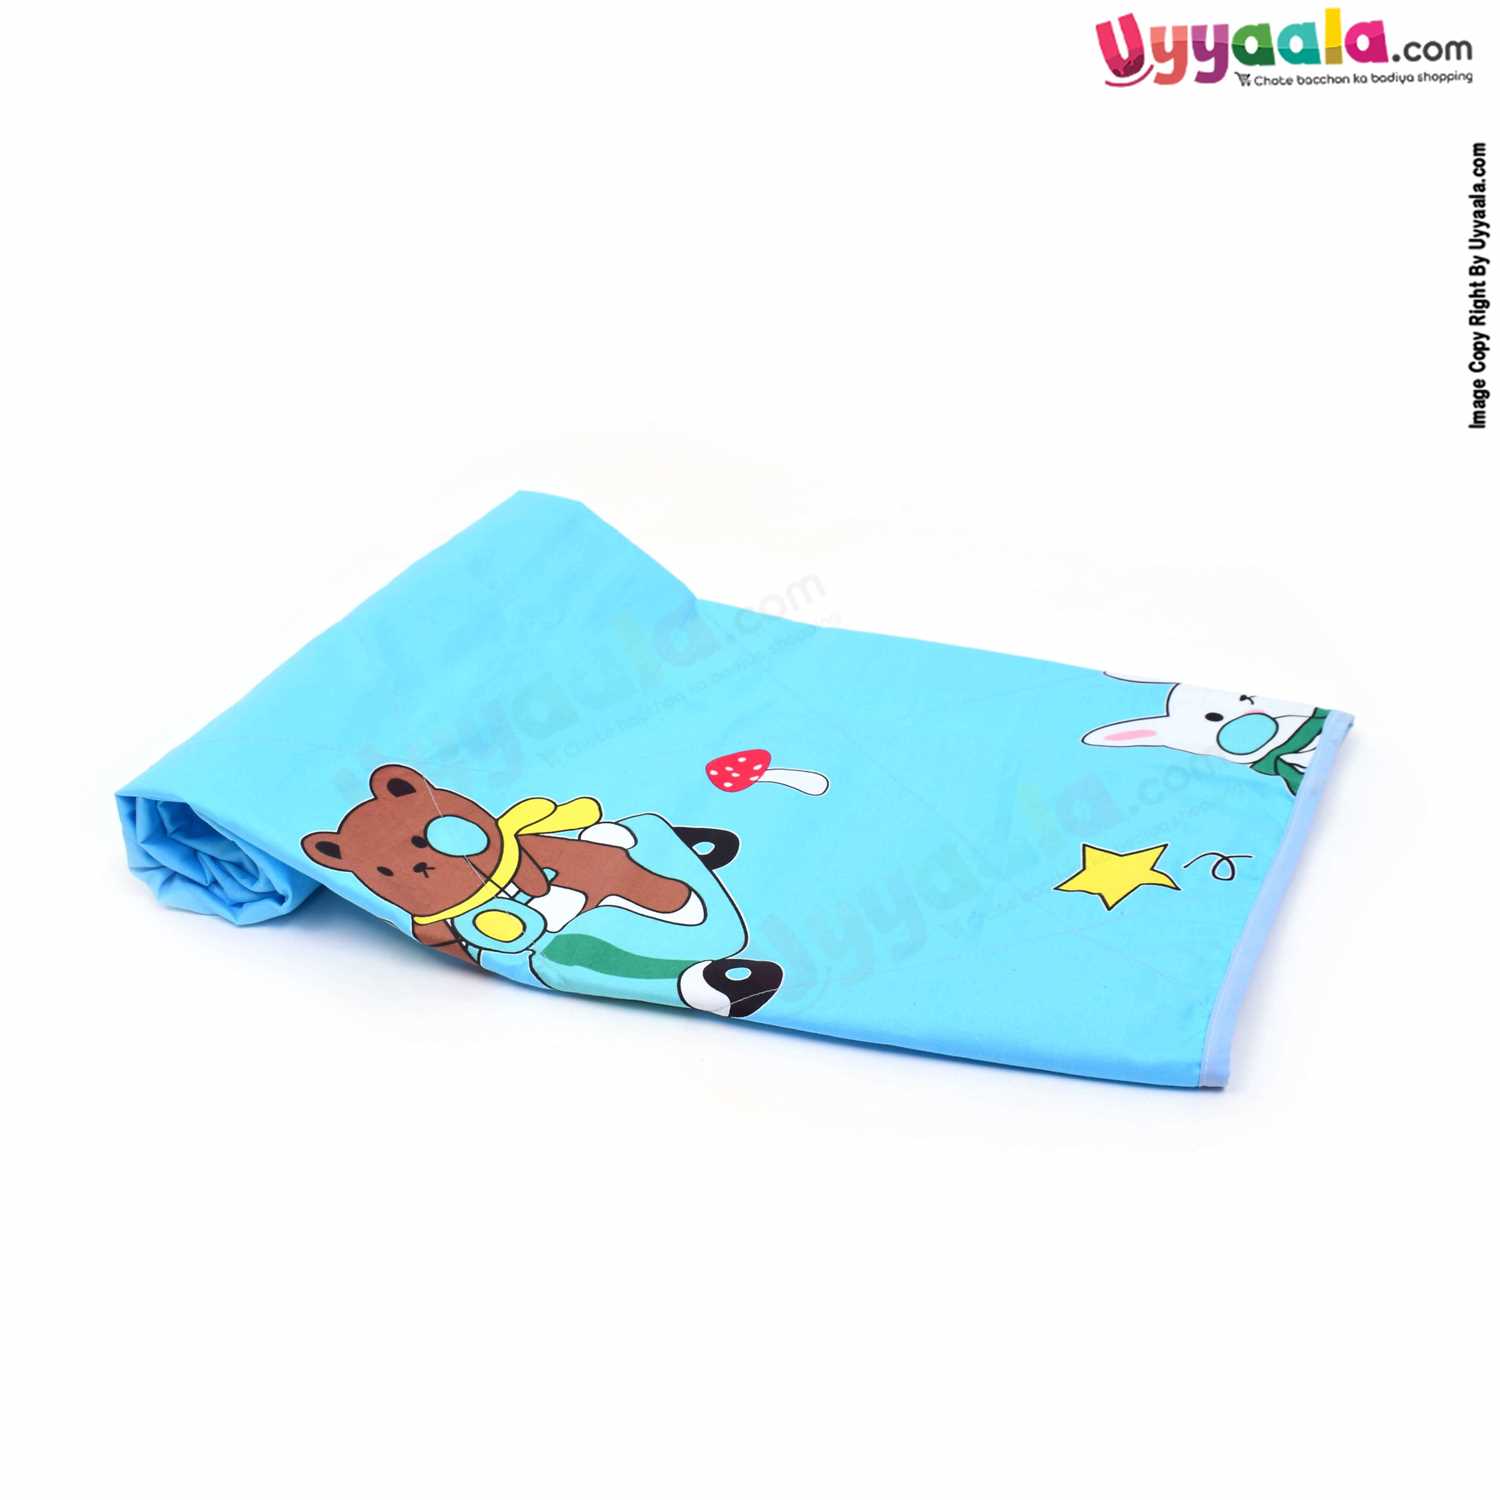 Double Layered Cotton Blanket with Teddy Bear Print for Babies 0-24m Age, Size (110*83cm)- Blue